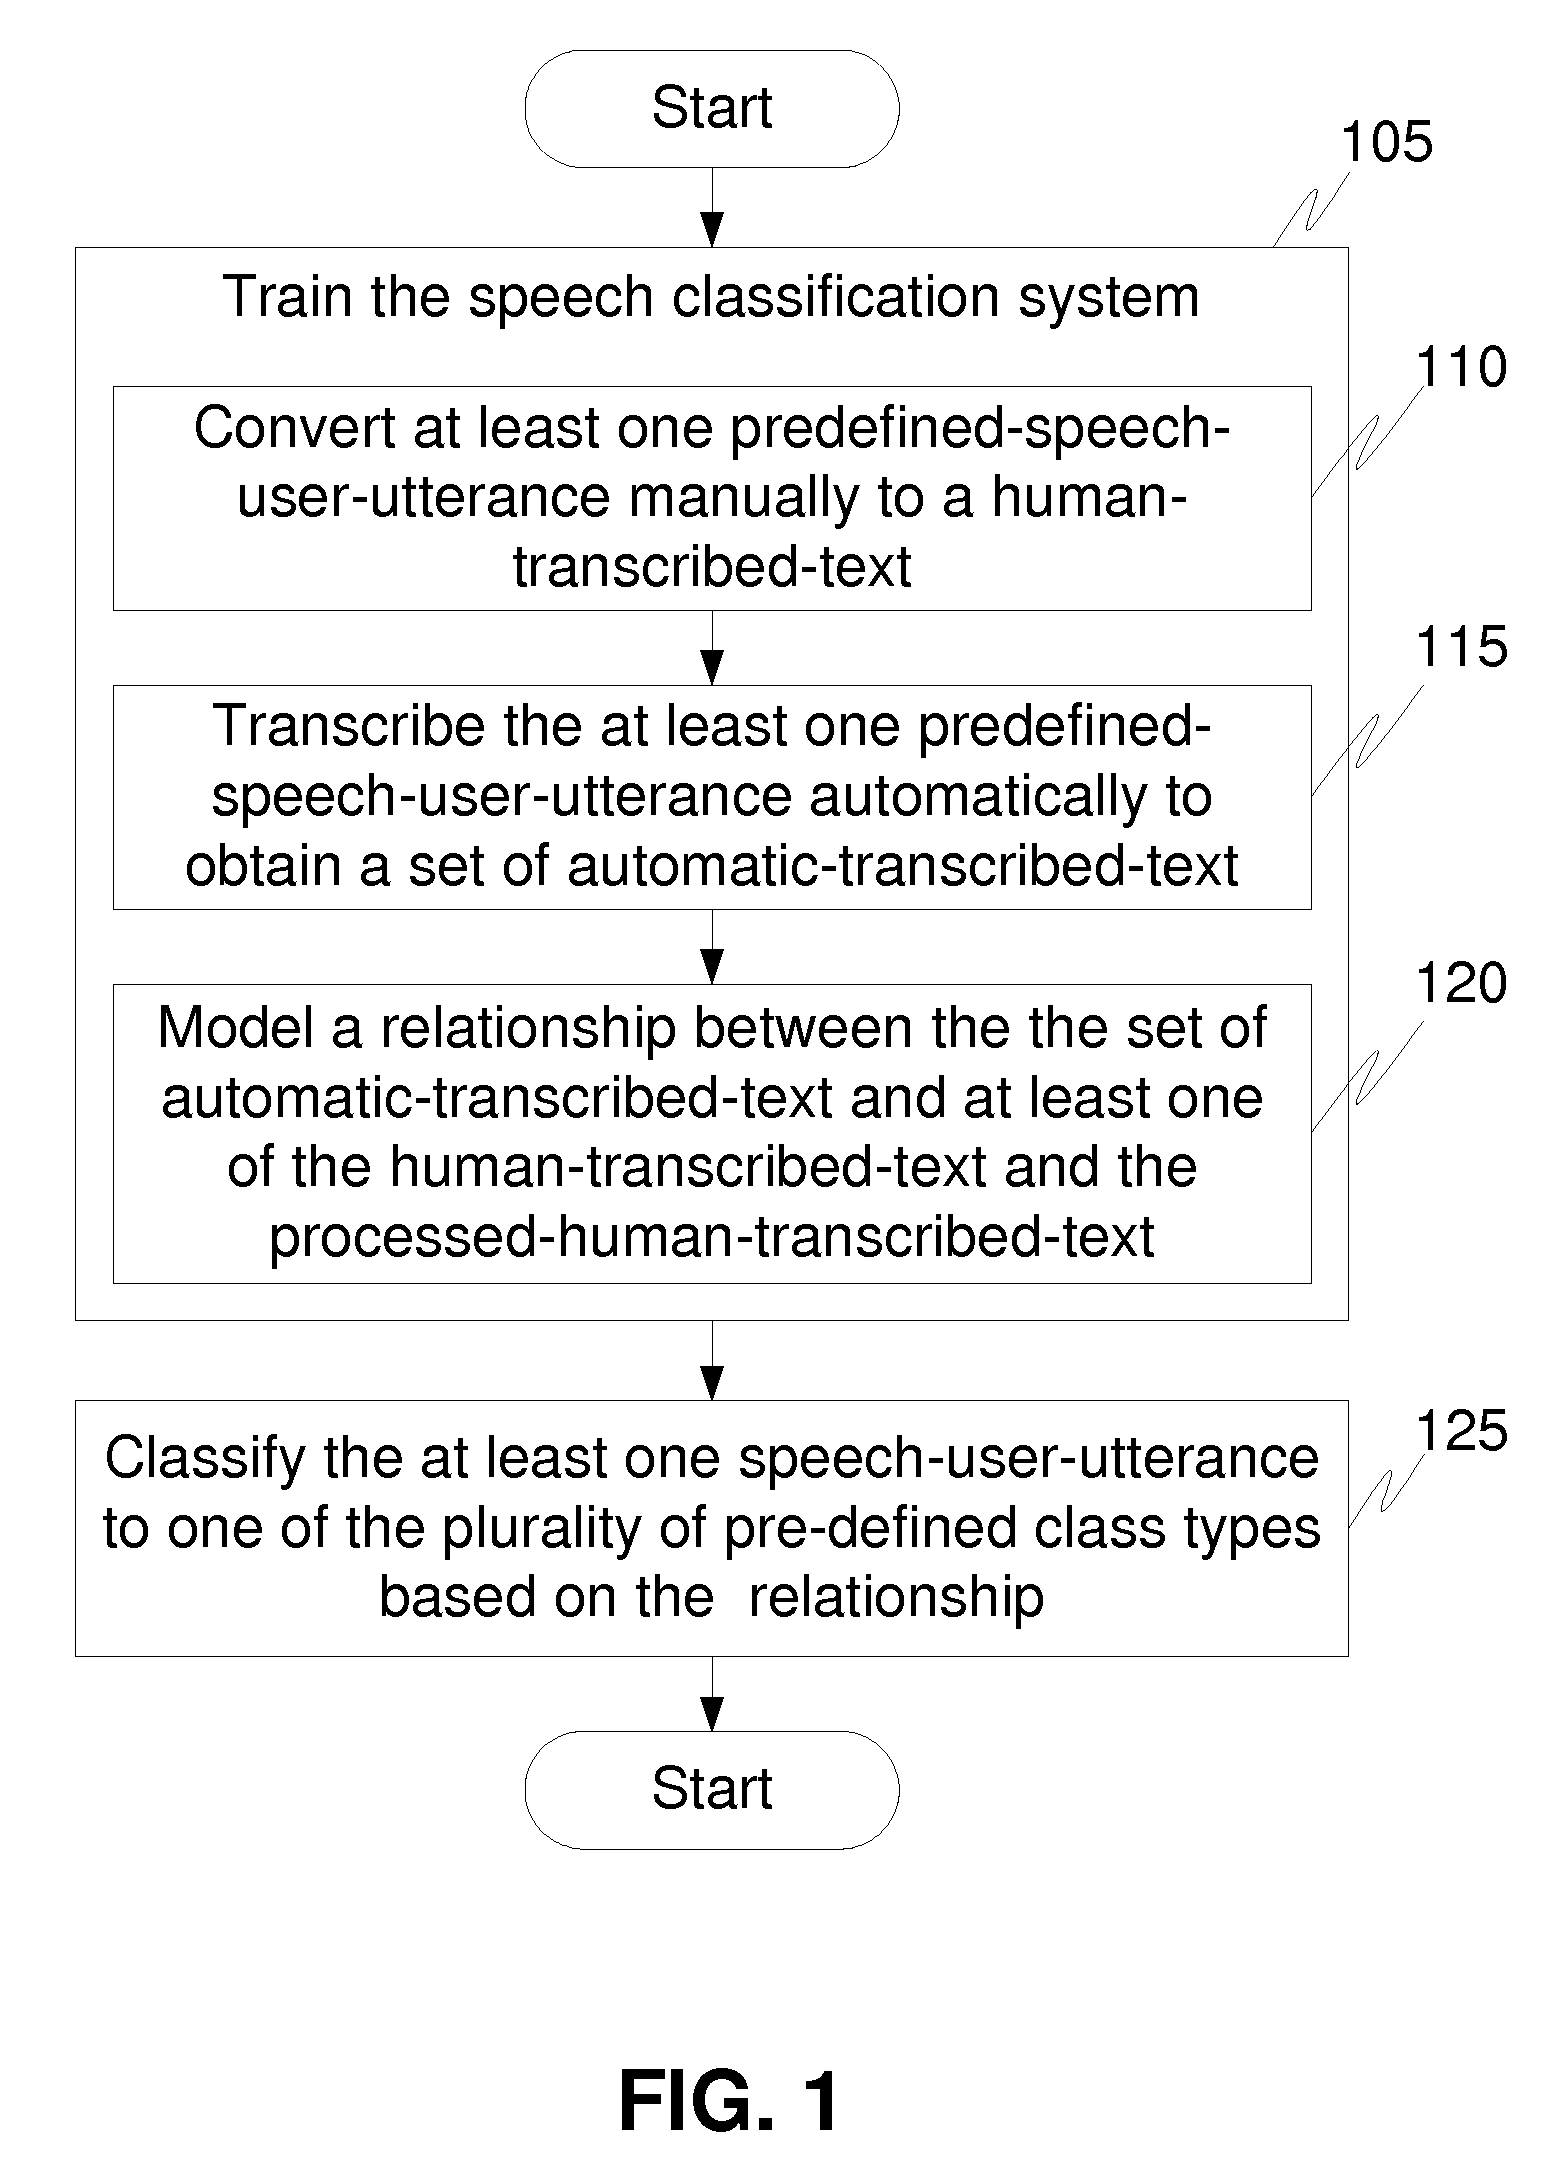 A method and system for speech classification